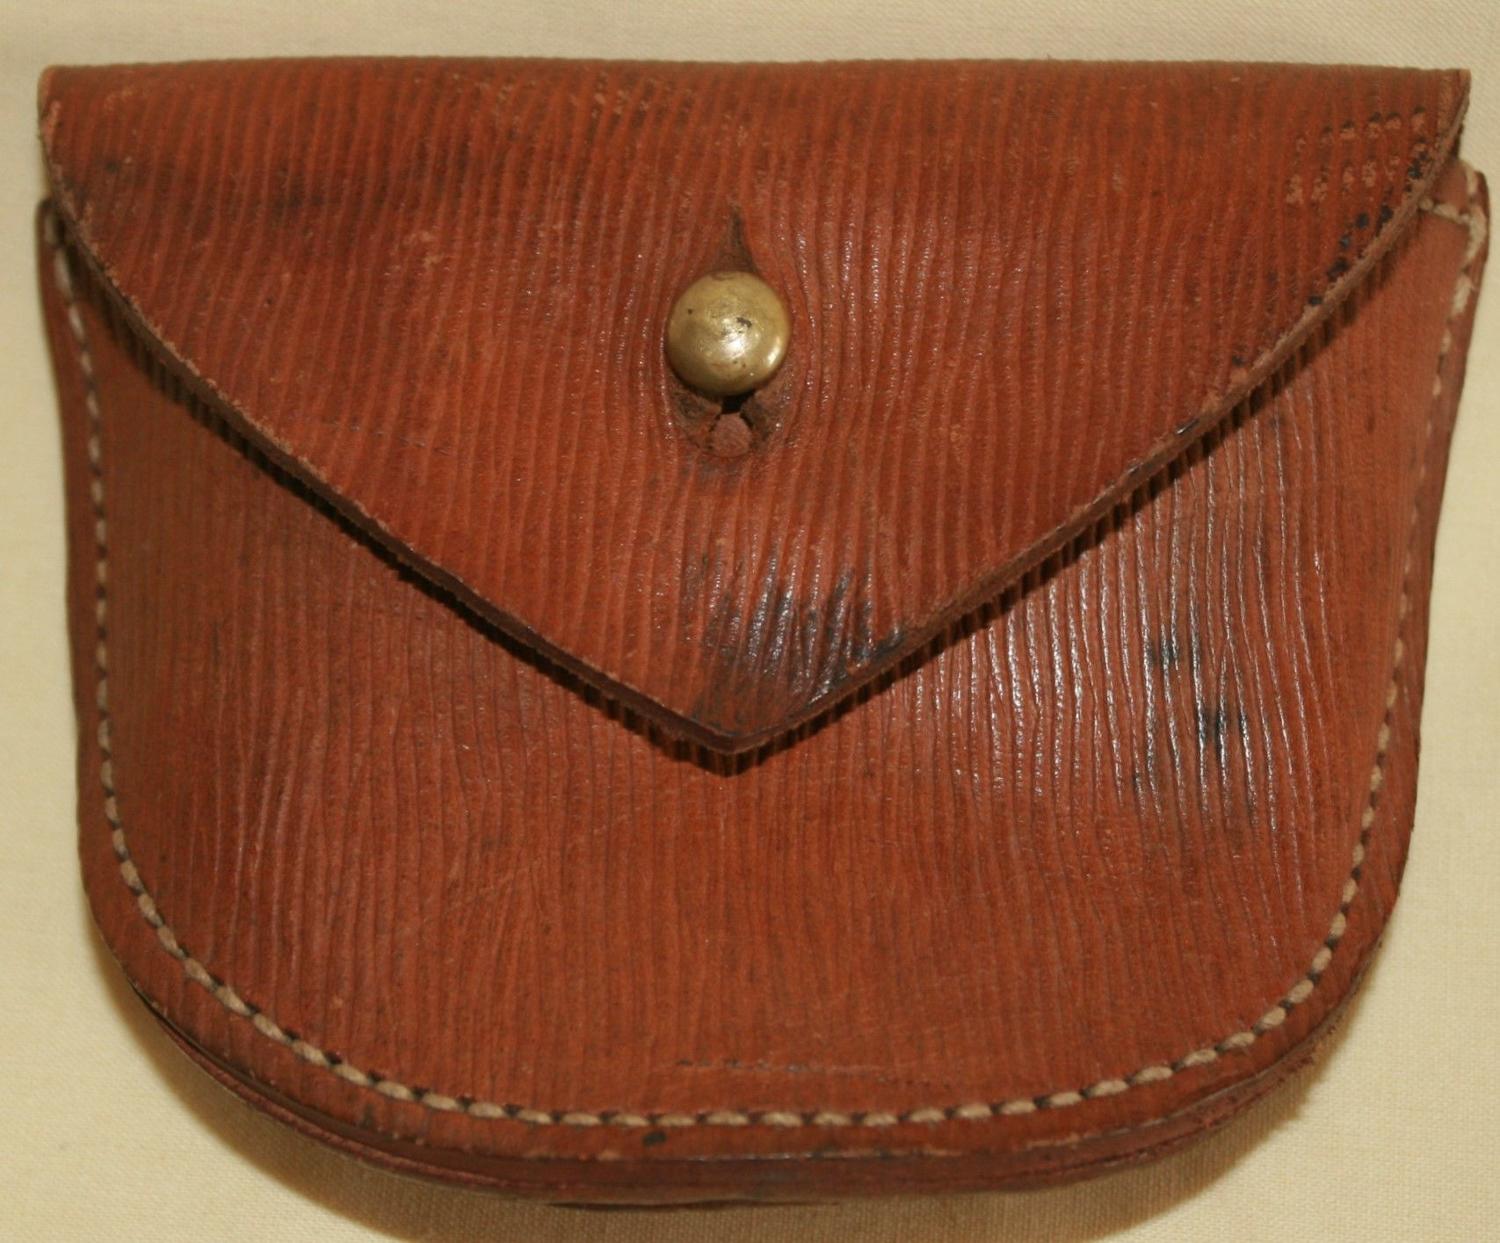 A 1917 DATED PISTOL AMMO POUCH LOOP TYPE FITTING